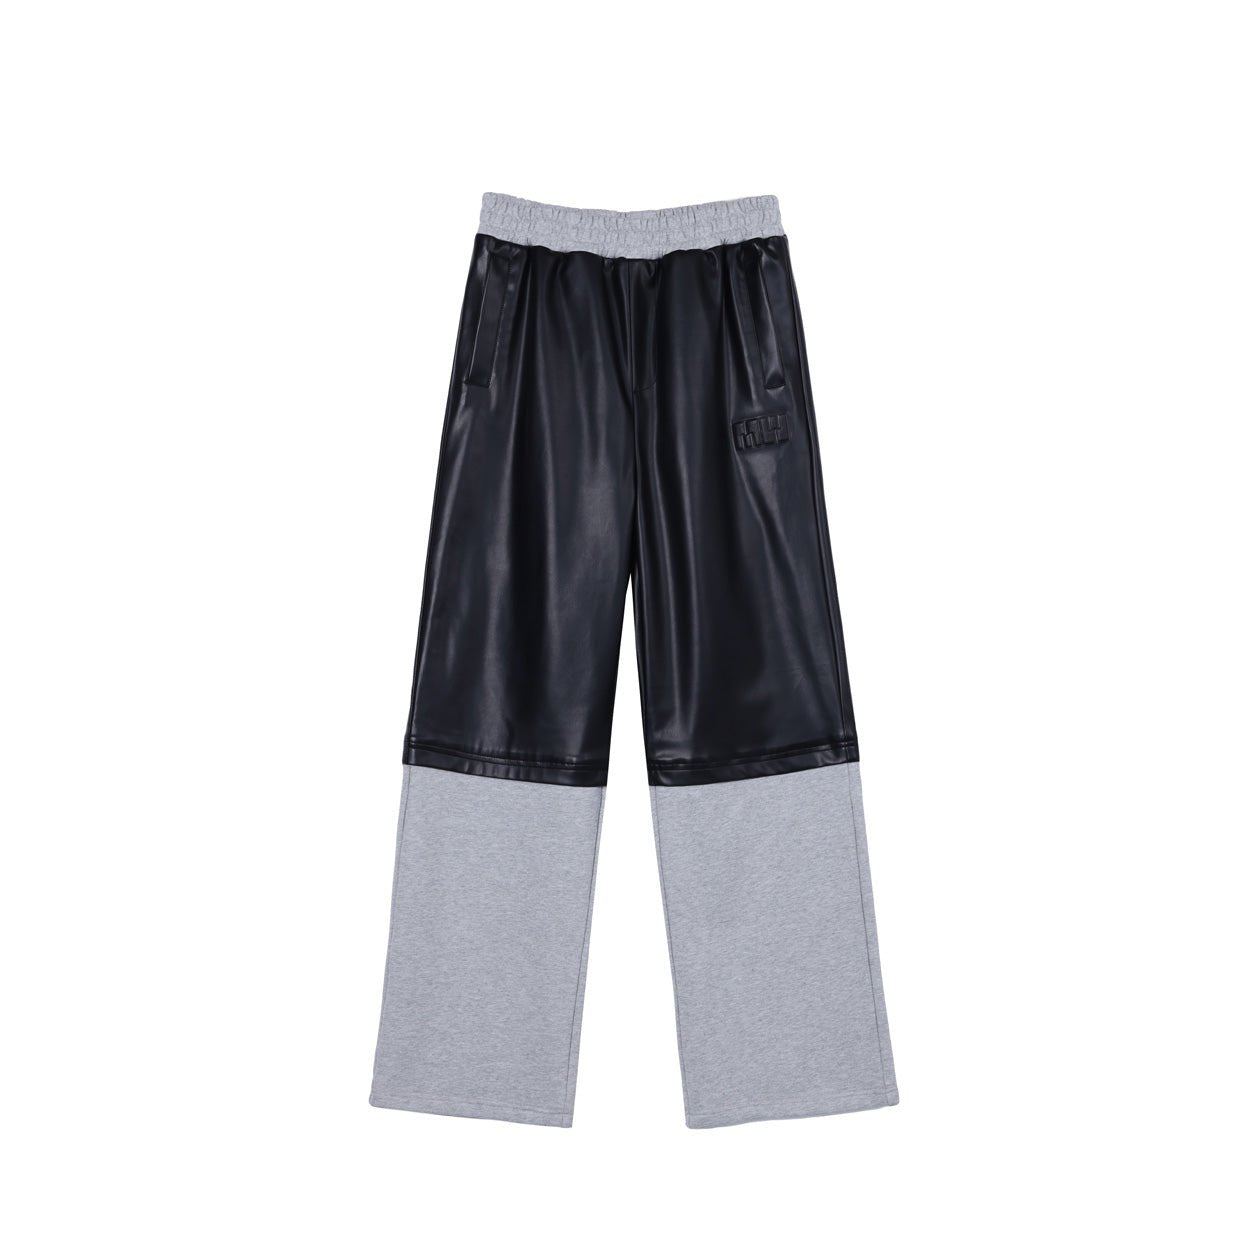 MEDIUM WELL Black And Grey Leather Sweatpants | MADA IN CHINA